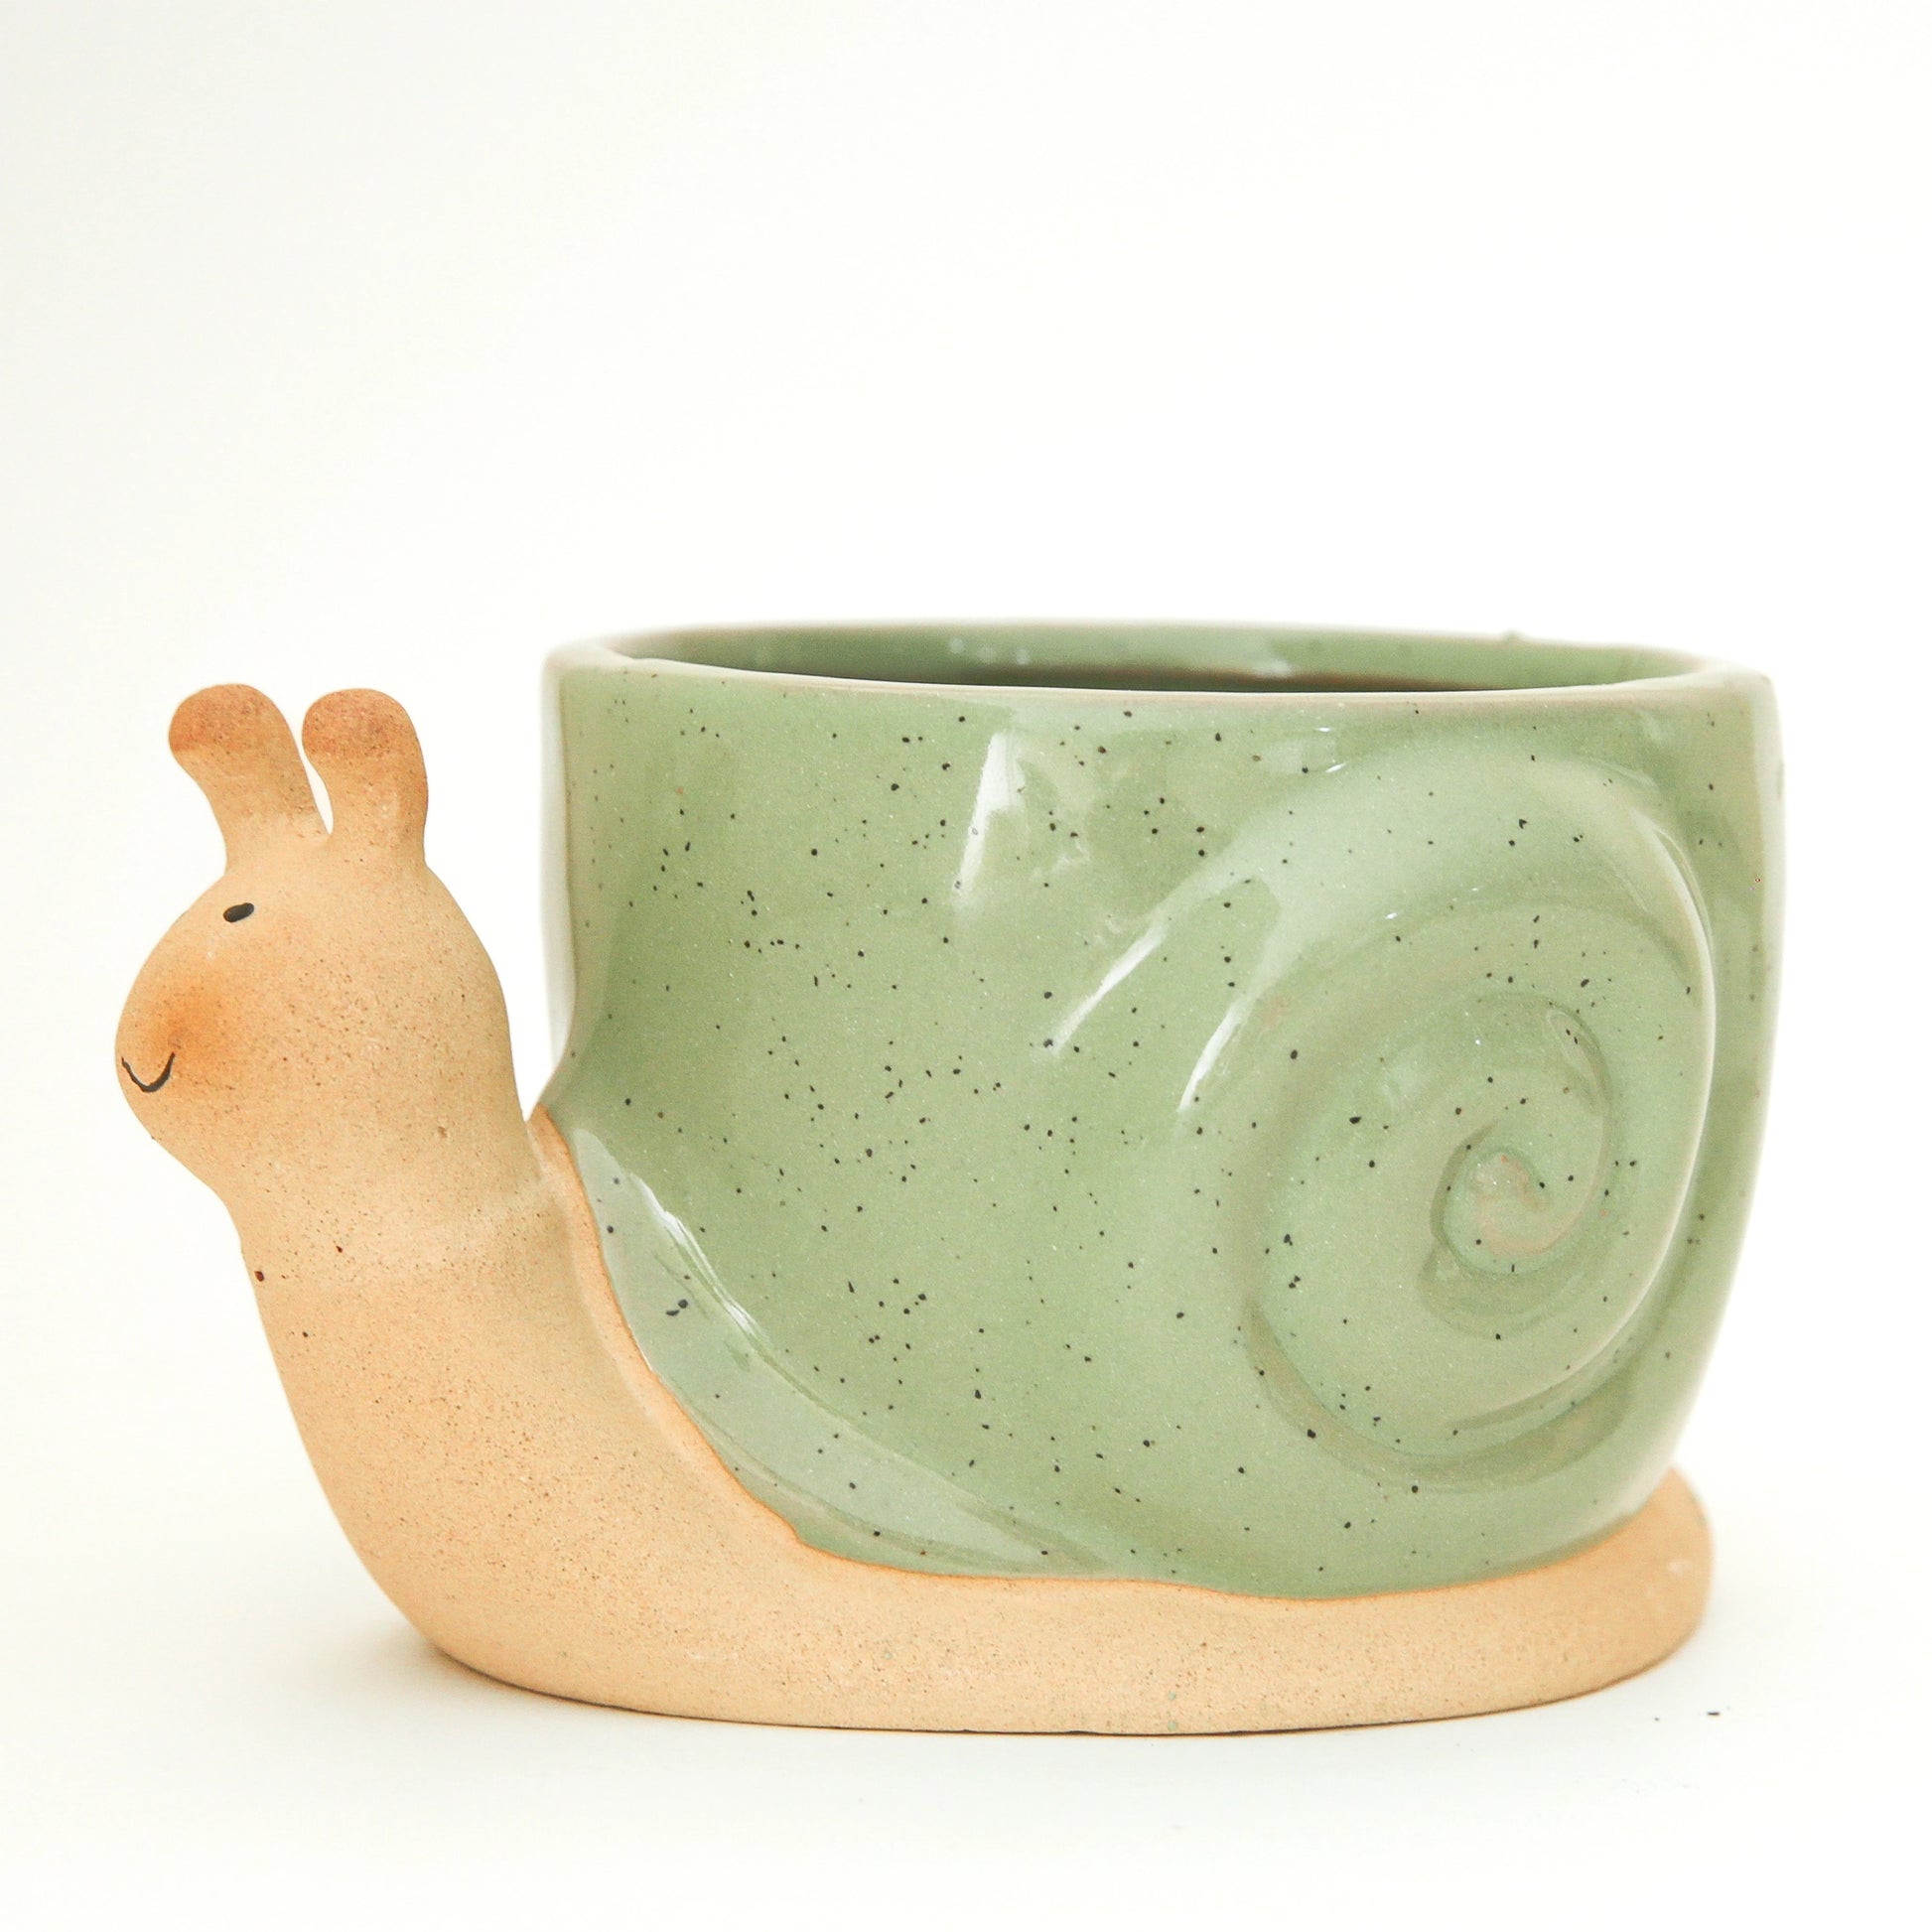 On a tan background is a ceramic planter in the shape of a snail with smiling face and a swirly green "shell".